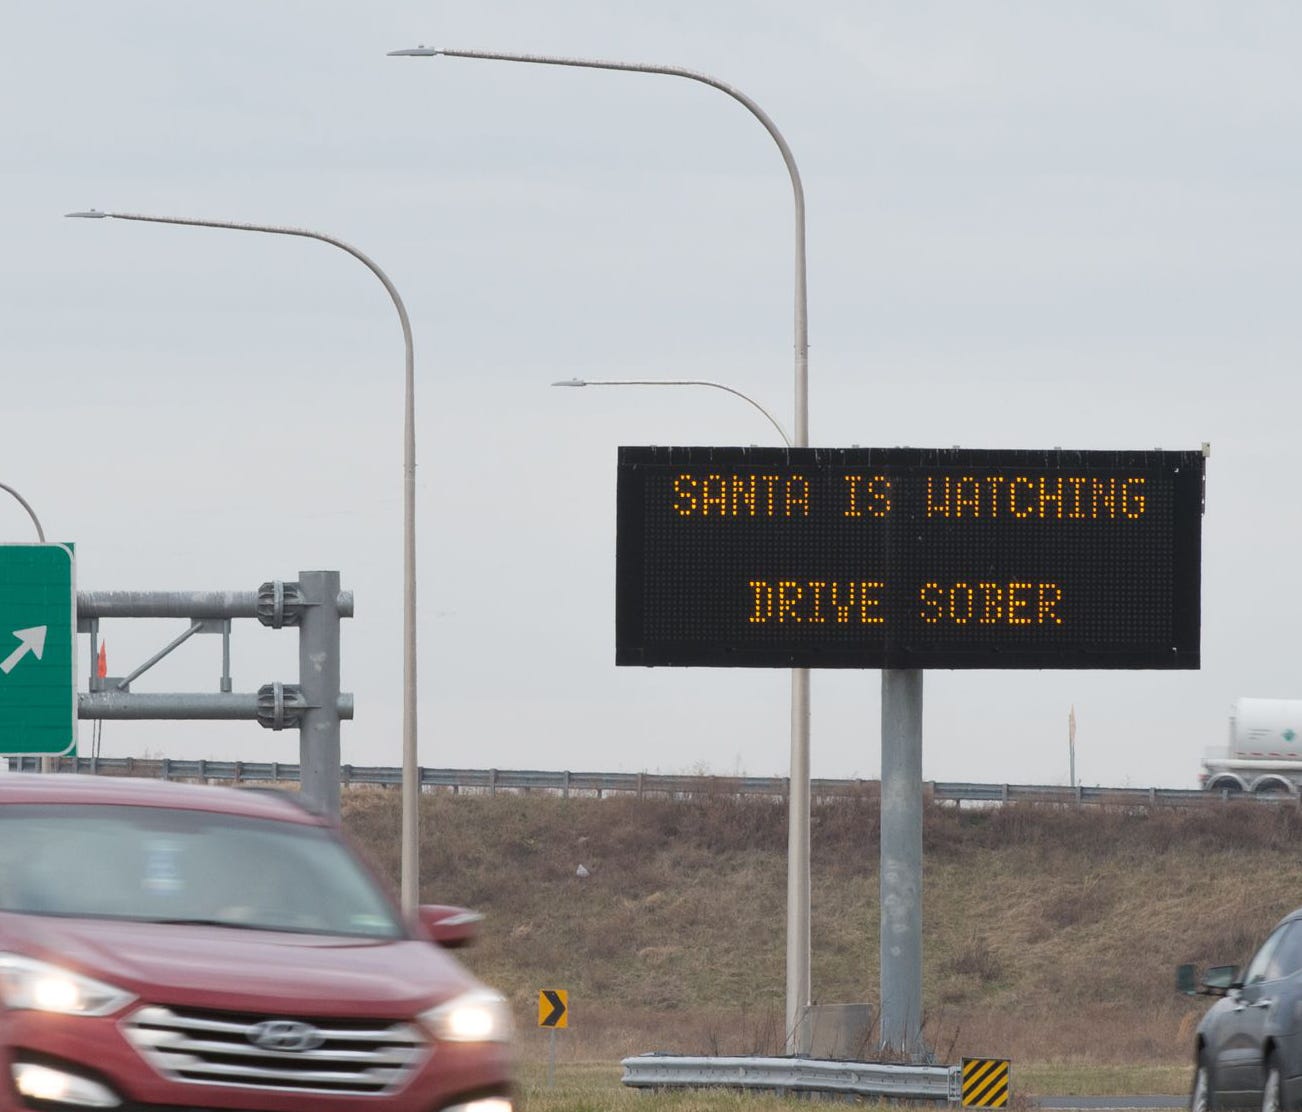 Delaware Department of Transportation officials say they are trying to be more creative with the messages on the agency's variable message boards along major highways in the state.